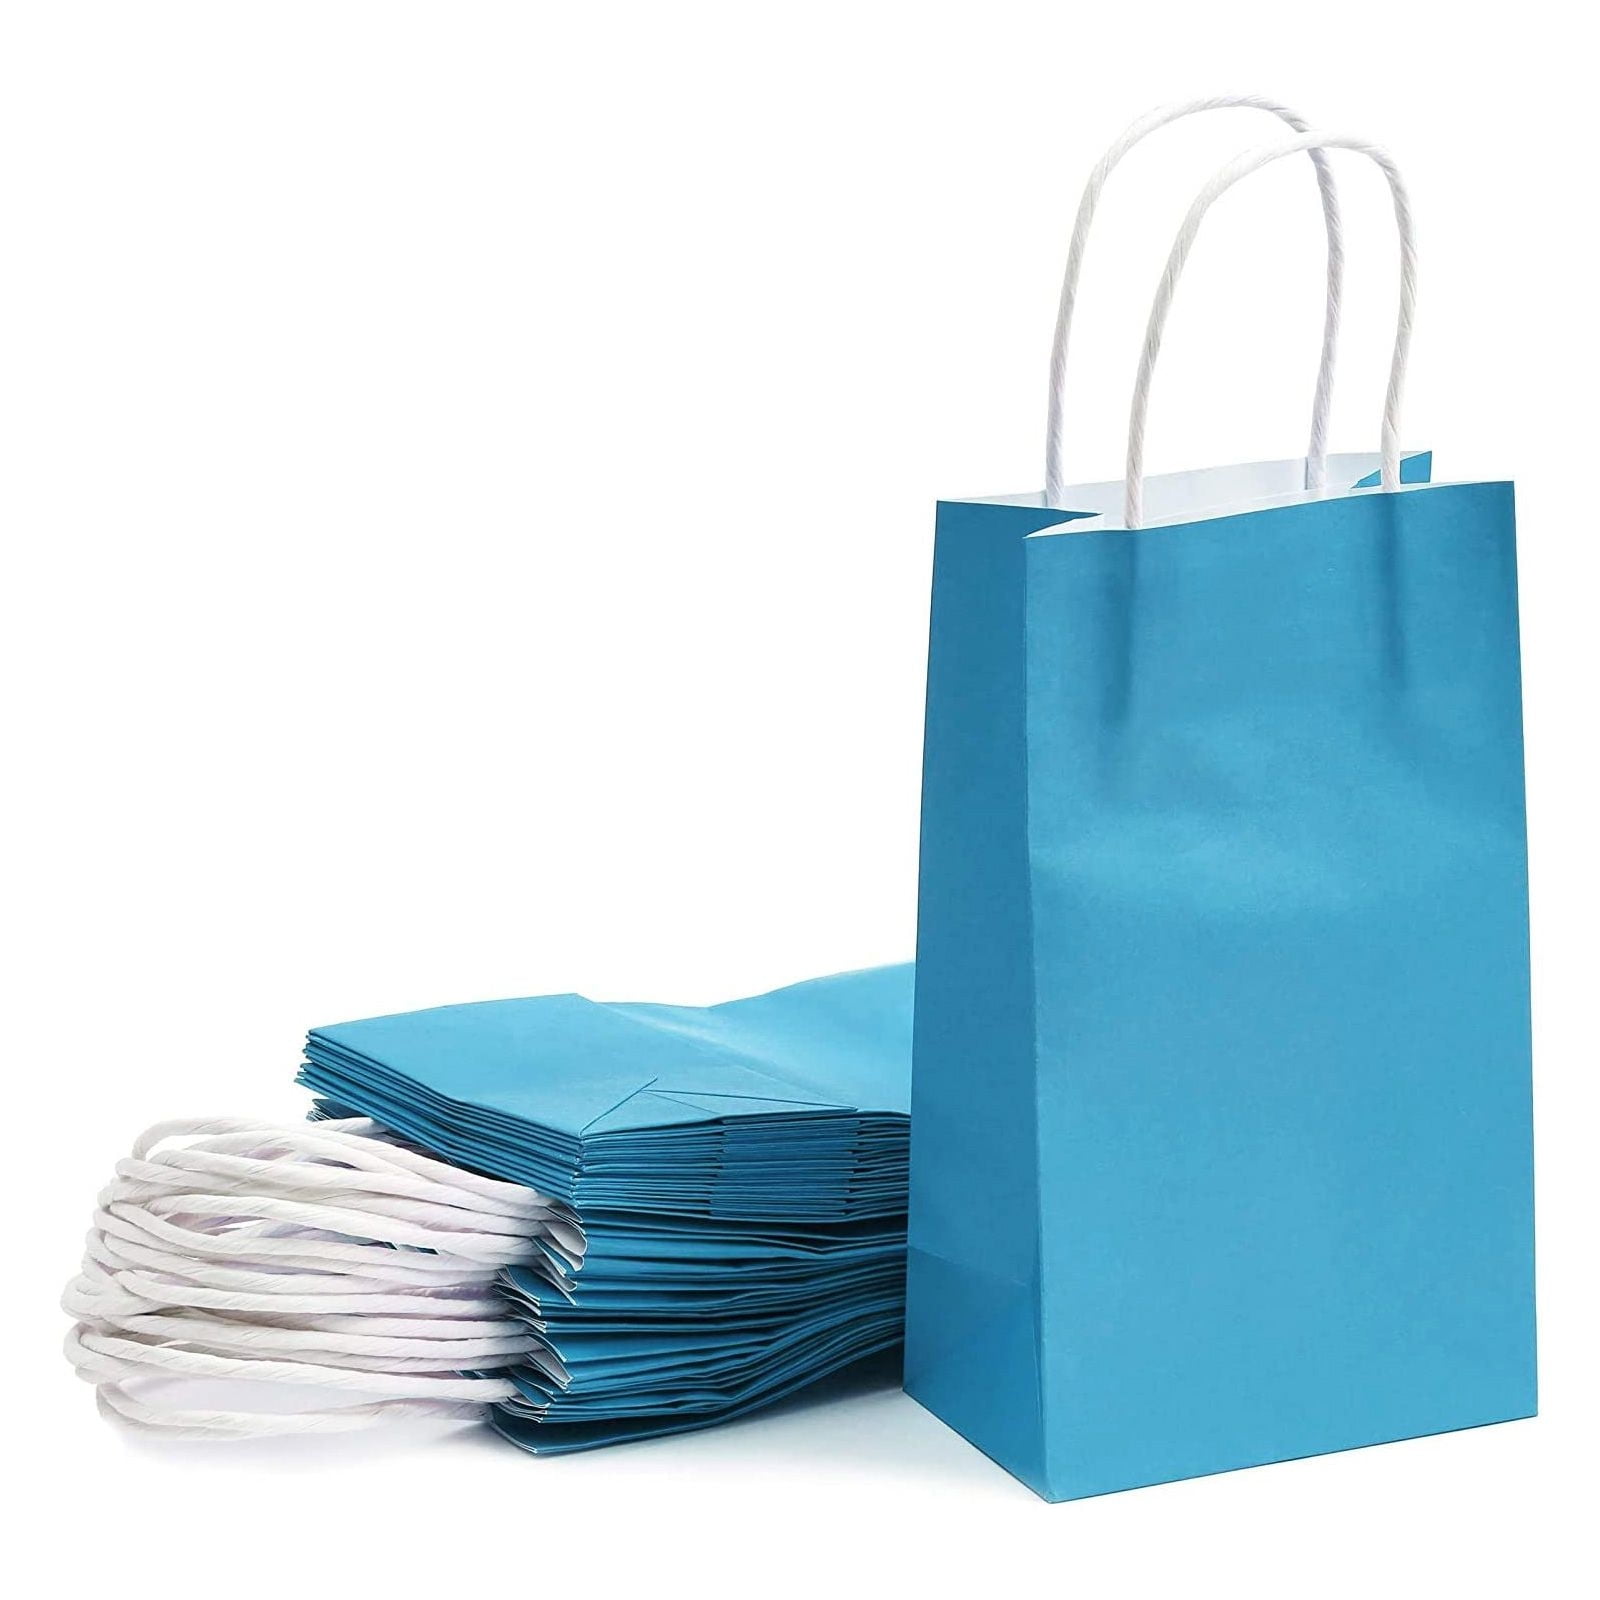 BLUE CANDY STRIPE PAPER BAGS GIFT SHOP PARTY SWEETS CAKE WEDDING-3 SIZES 